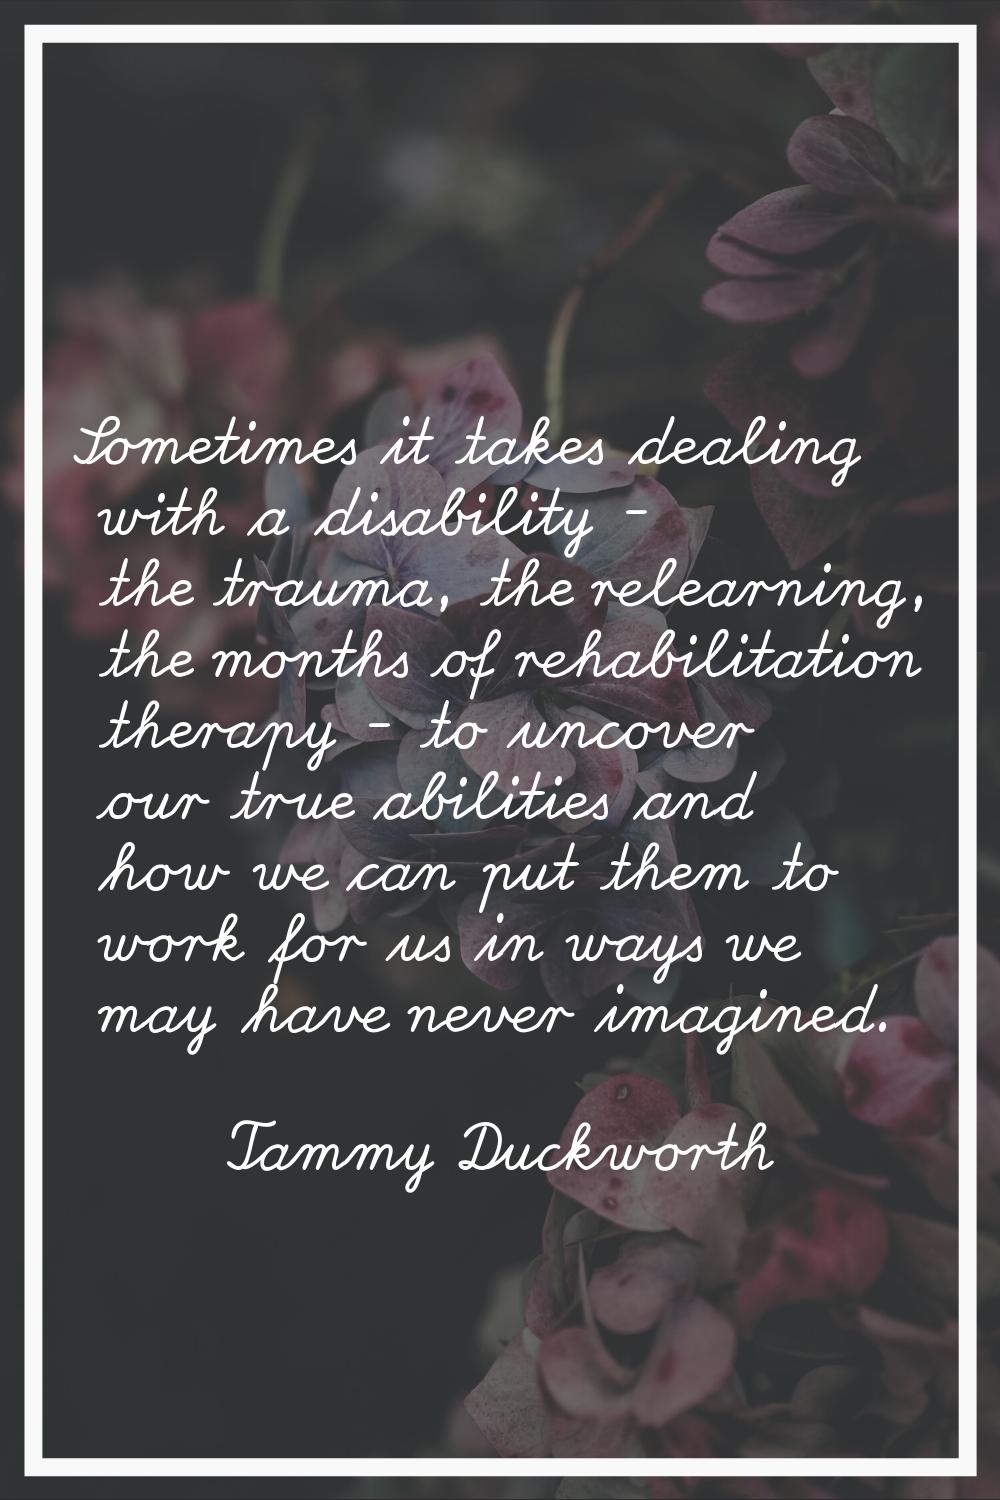 Sometimes it takes dealing with a disability - the trauma, the relearning, the months of rehabilita